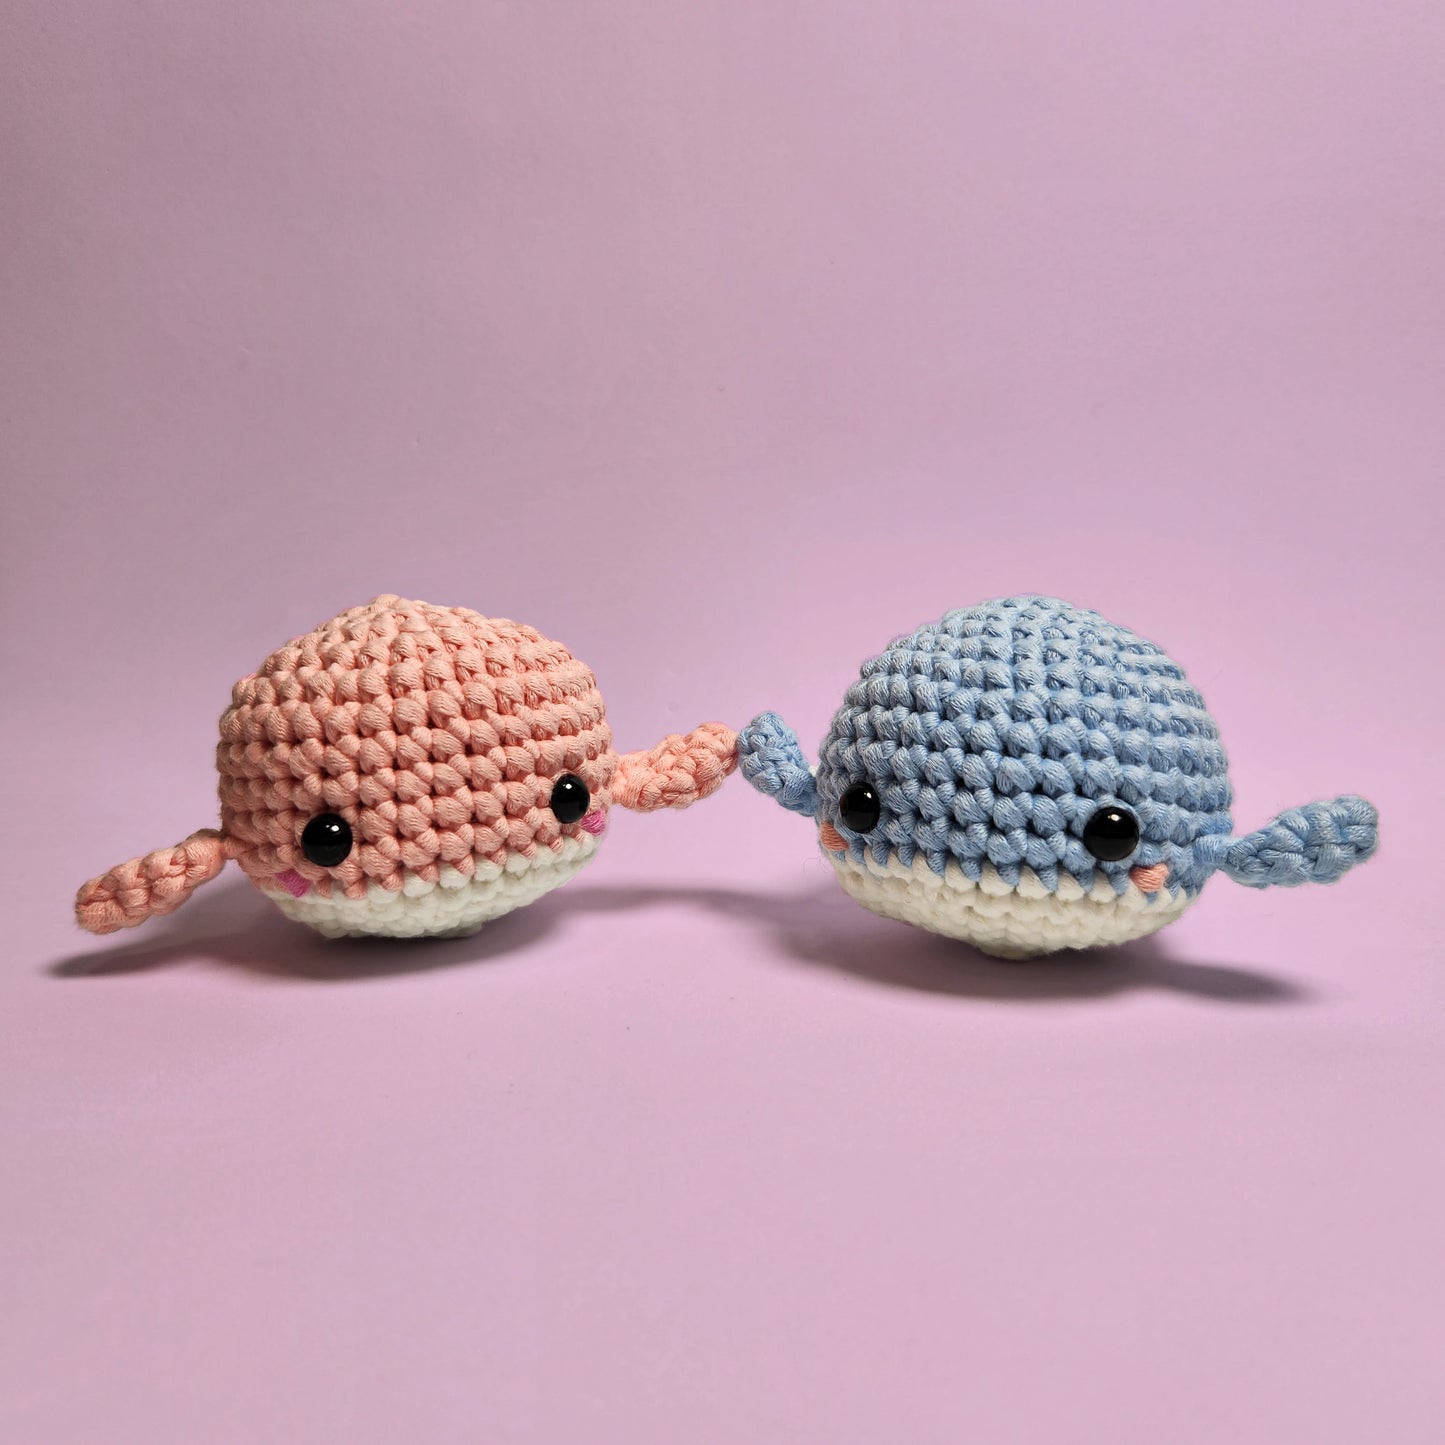 Pair of adorable amigurumi whales, one blue and one pink, with blush accents. Handcrafted with care and perfect for those new to crocheting using The Squishy Pals crochet kits.